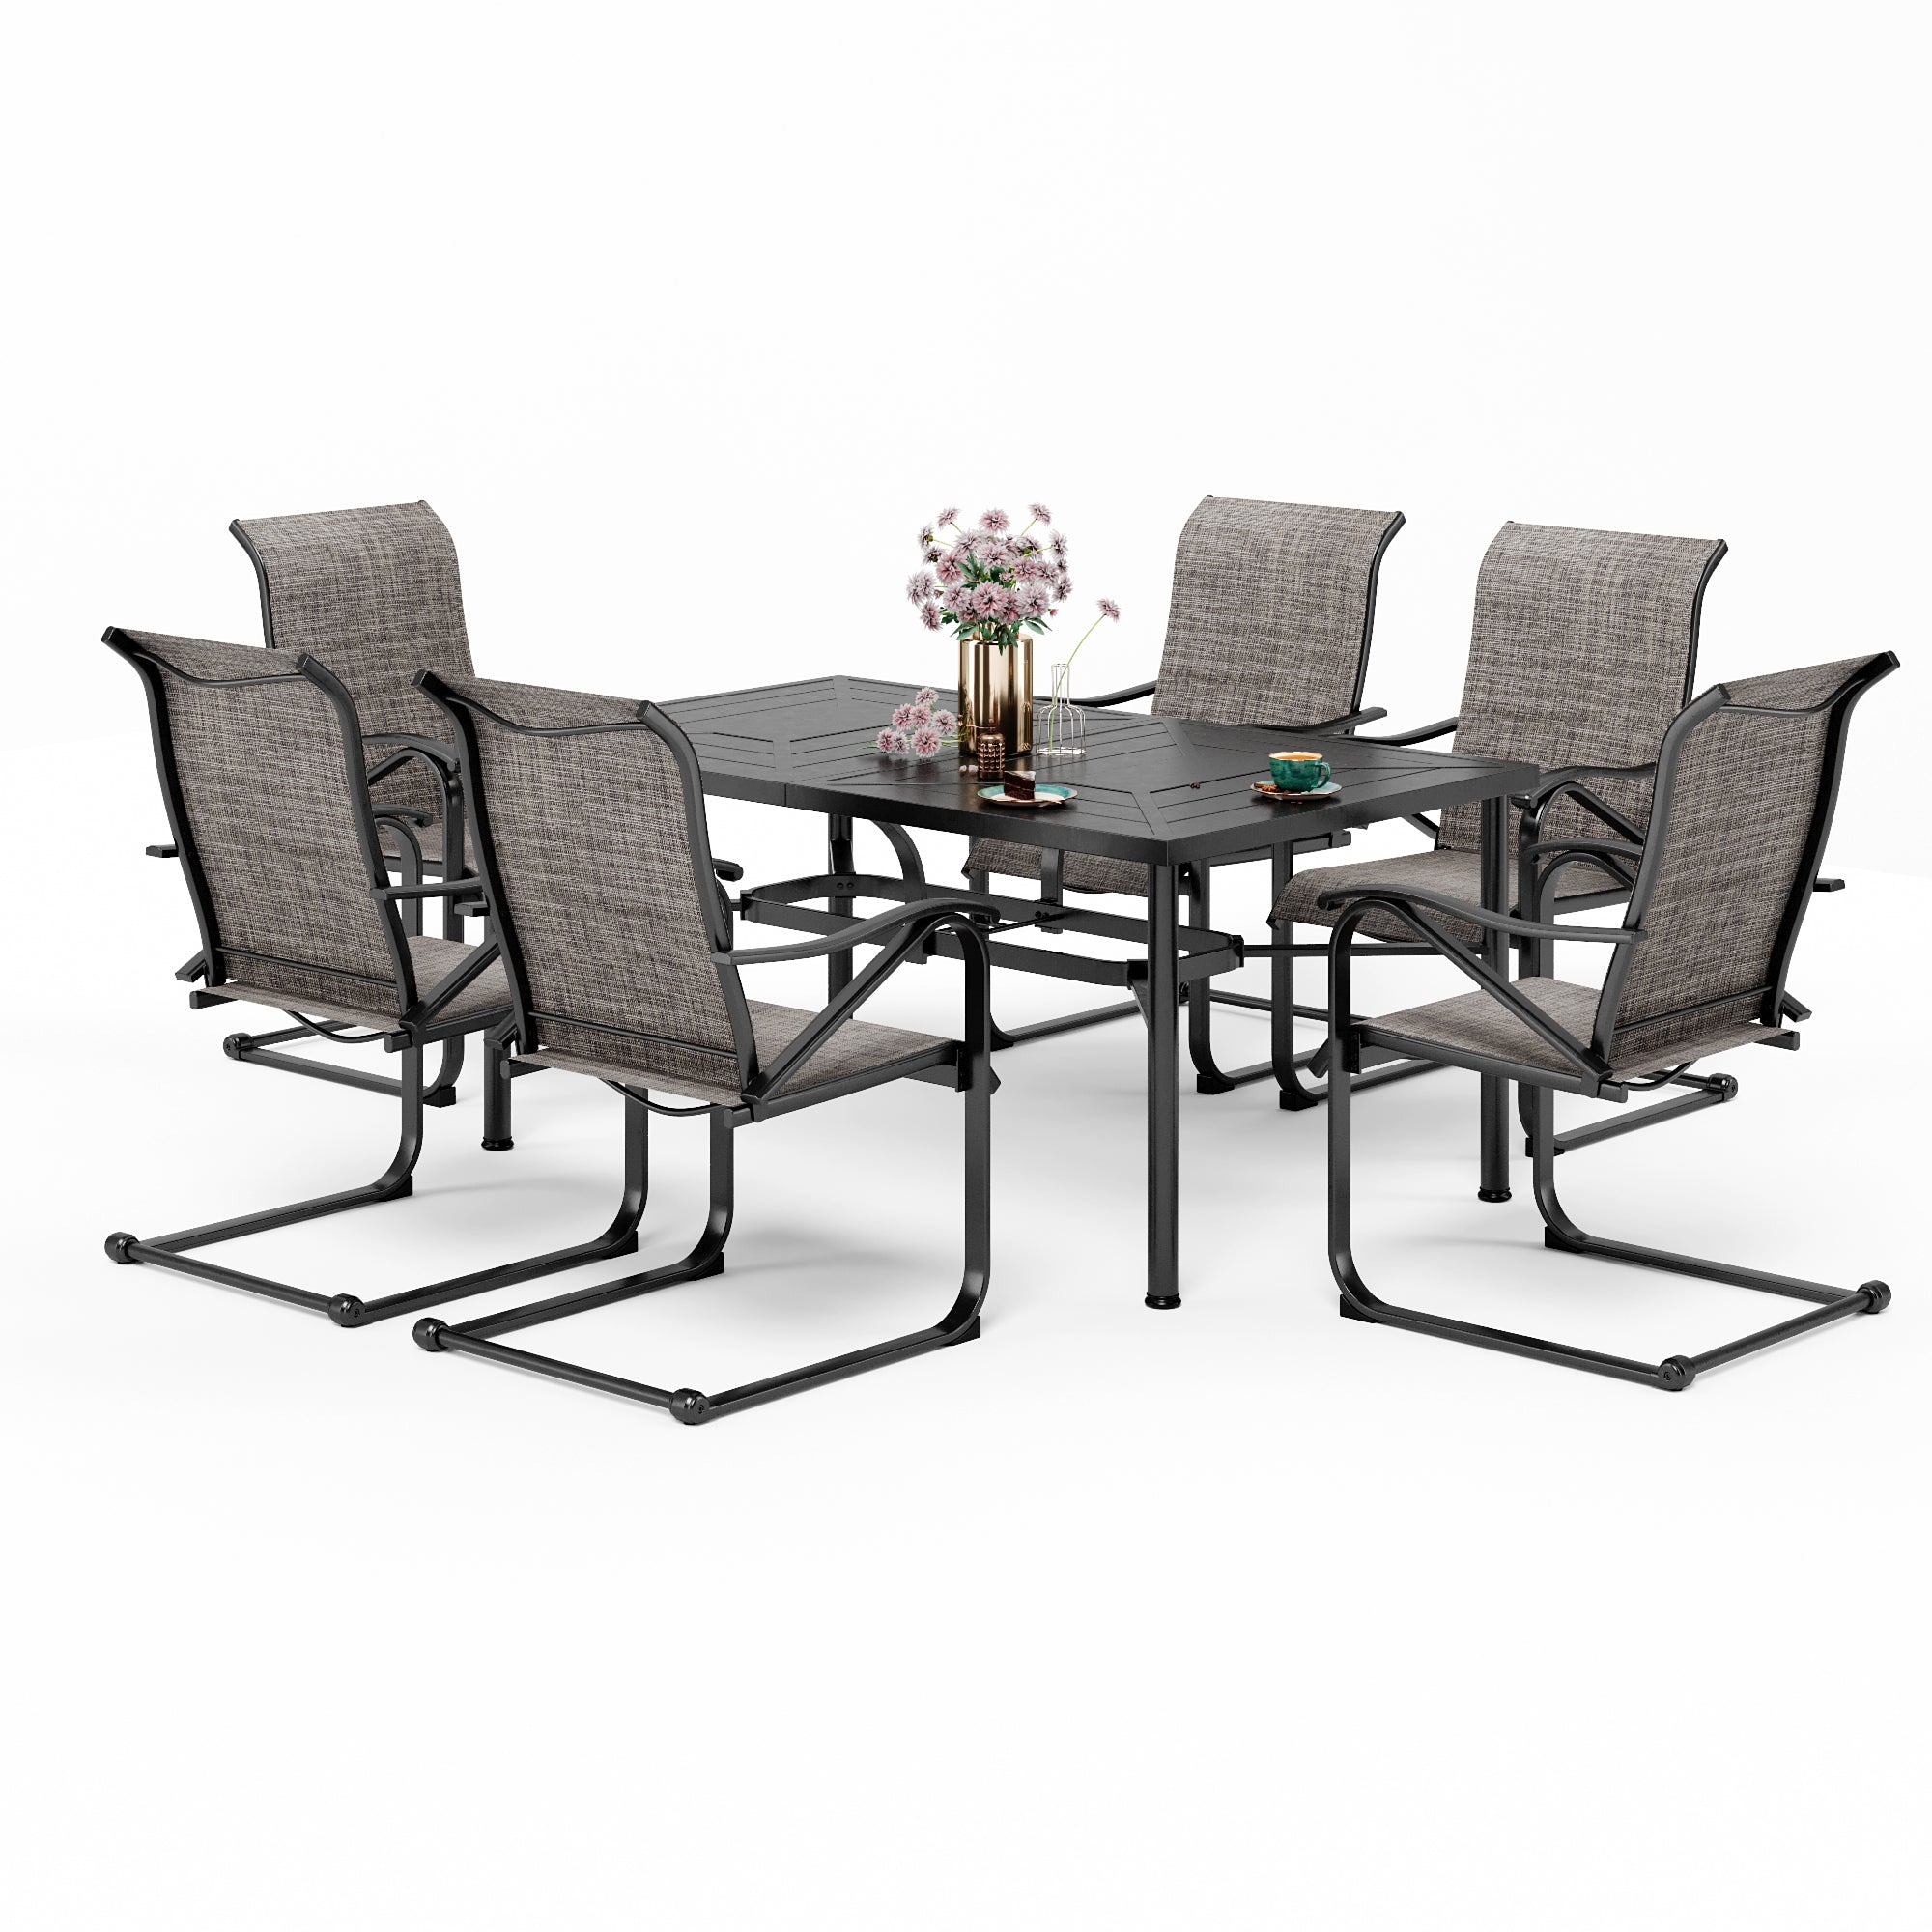 MFSTUDIO 7-Piece Patio Dining Set Geometrically Stamped Rectangle Table & Textilene C-Spring Chairs